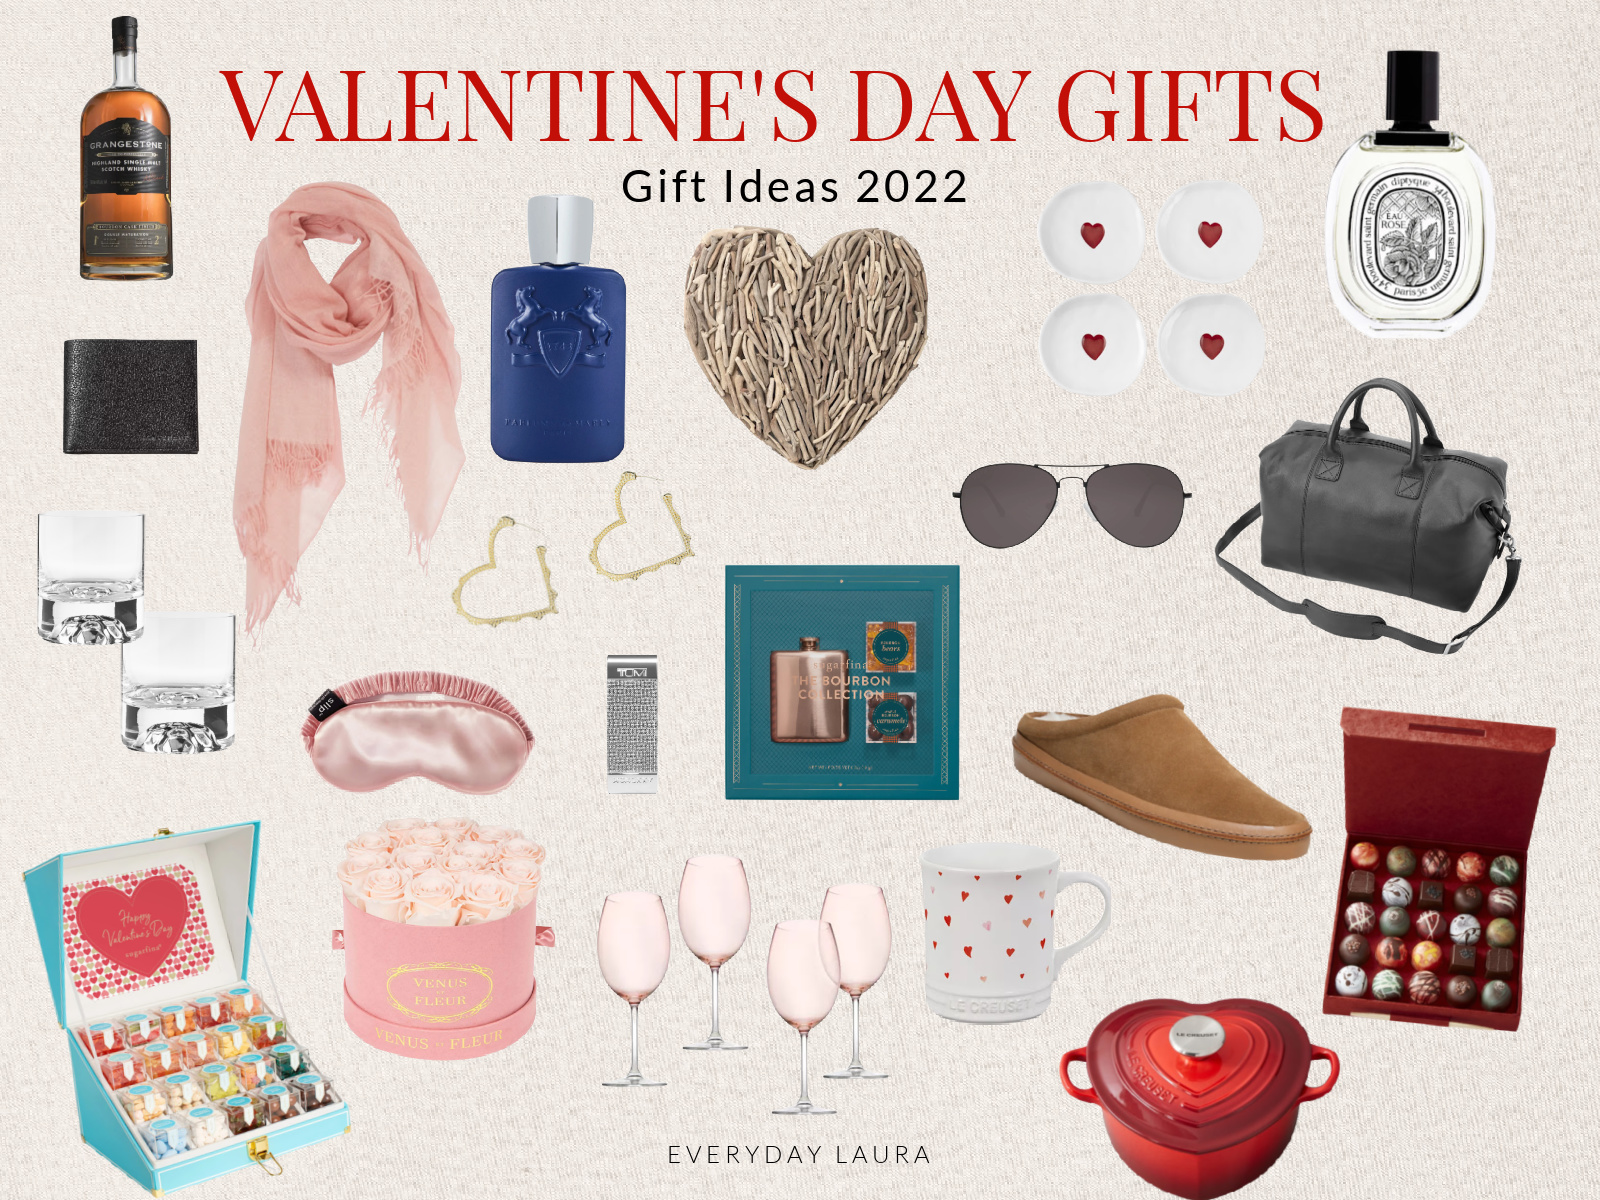 Valentine's Day Gift Ideas: 9 Gifts for Everyone on Your List - DIVINE